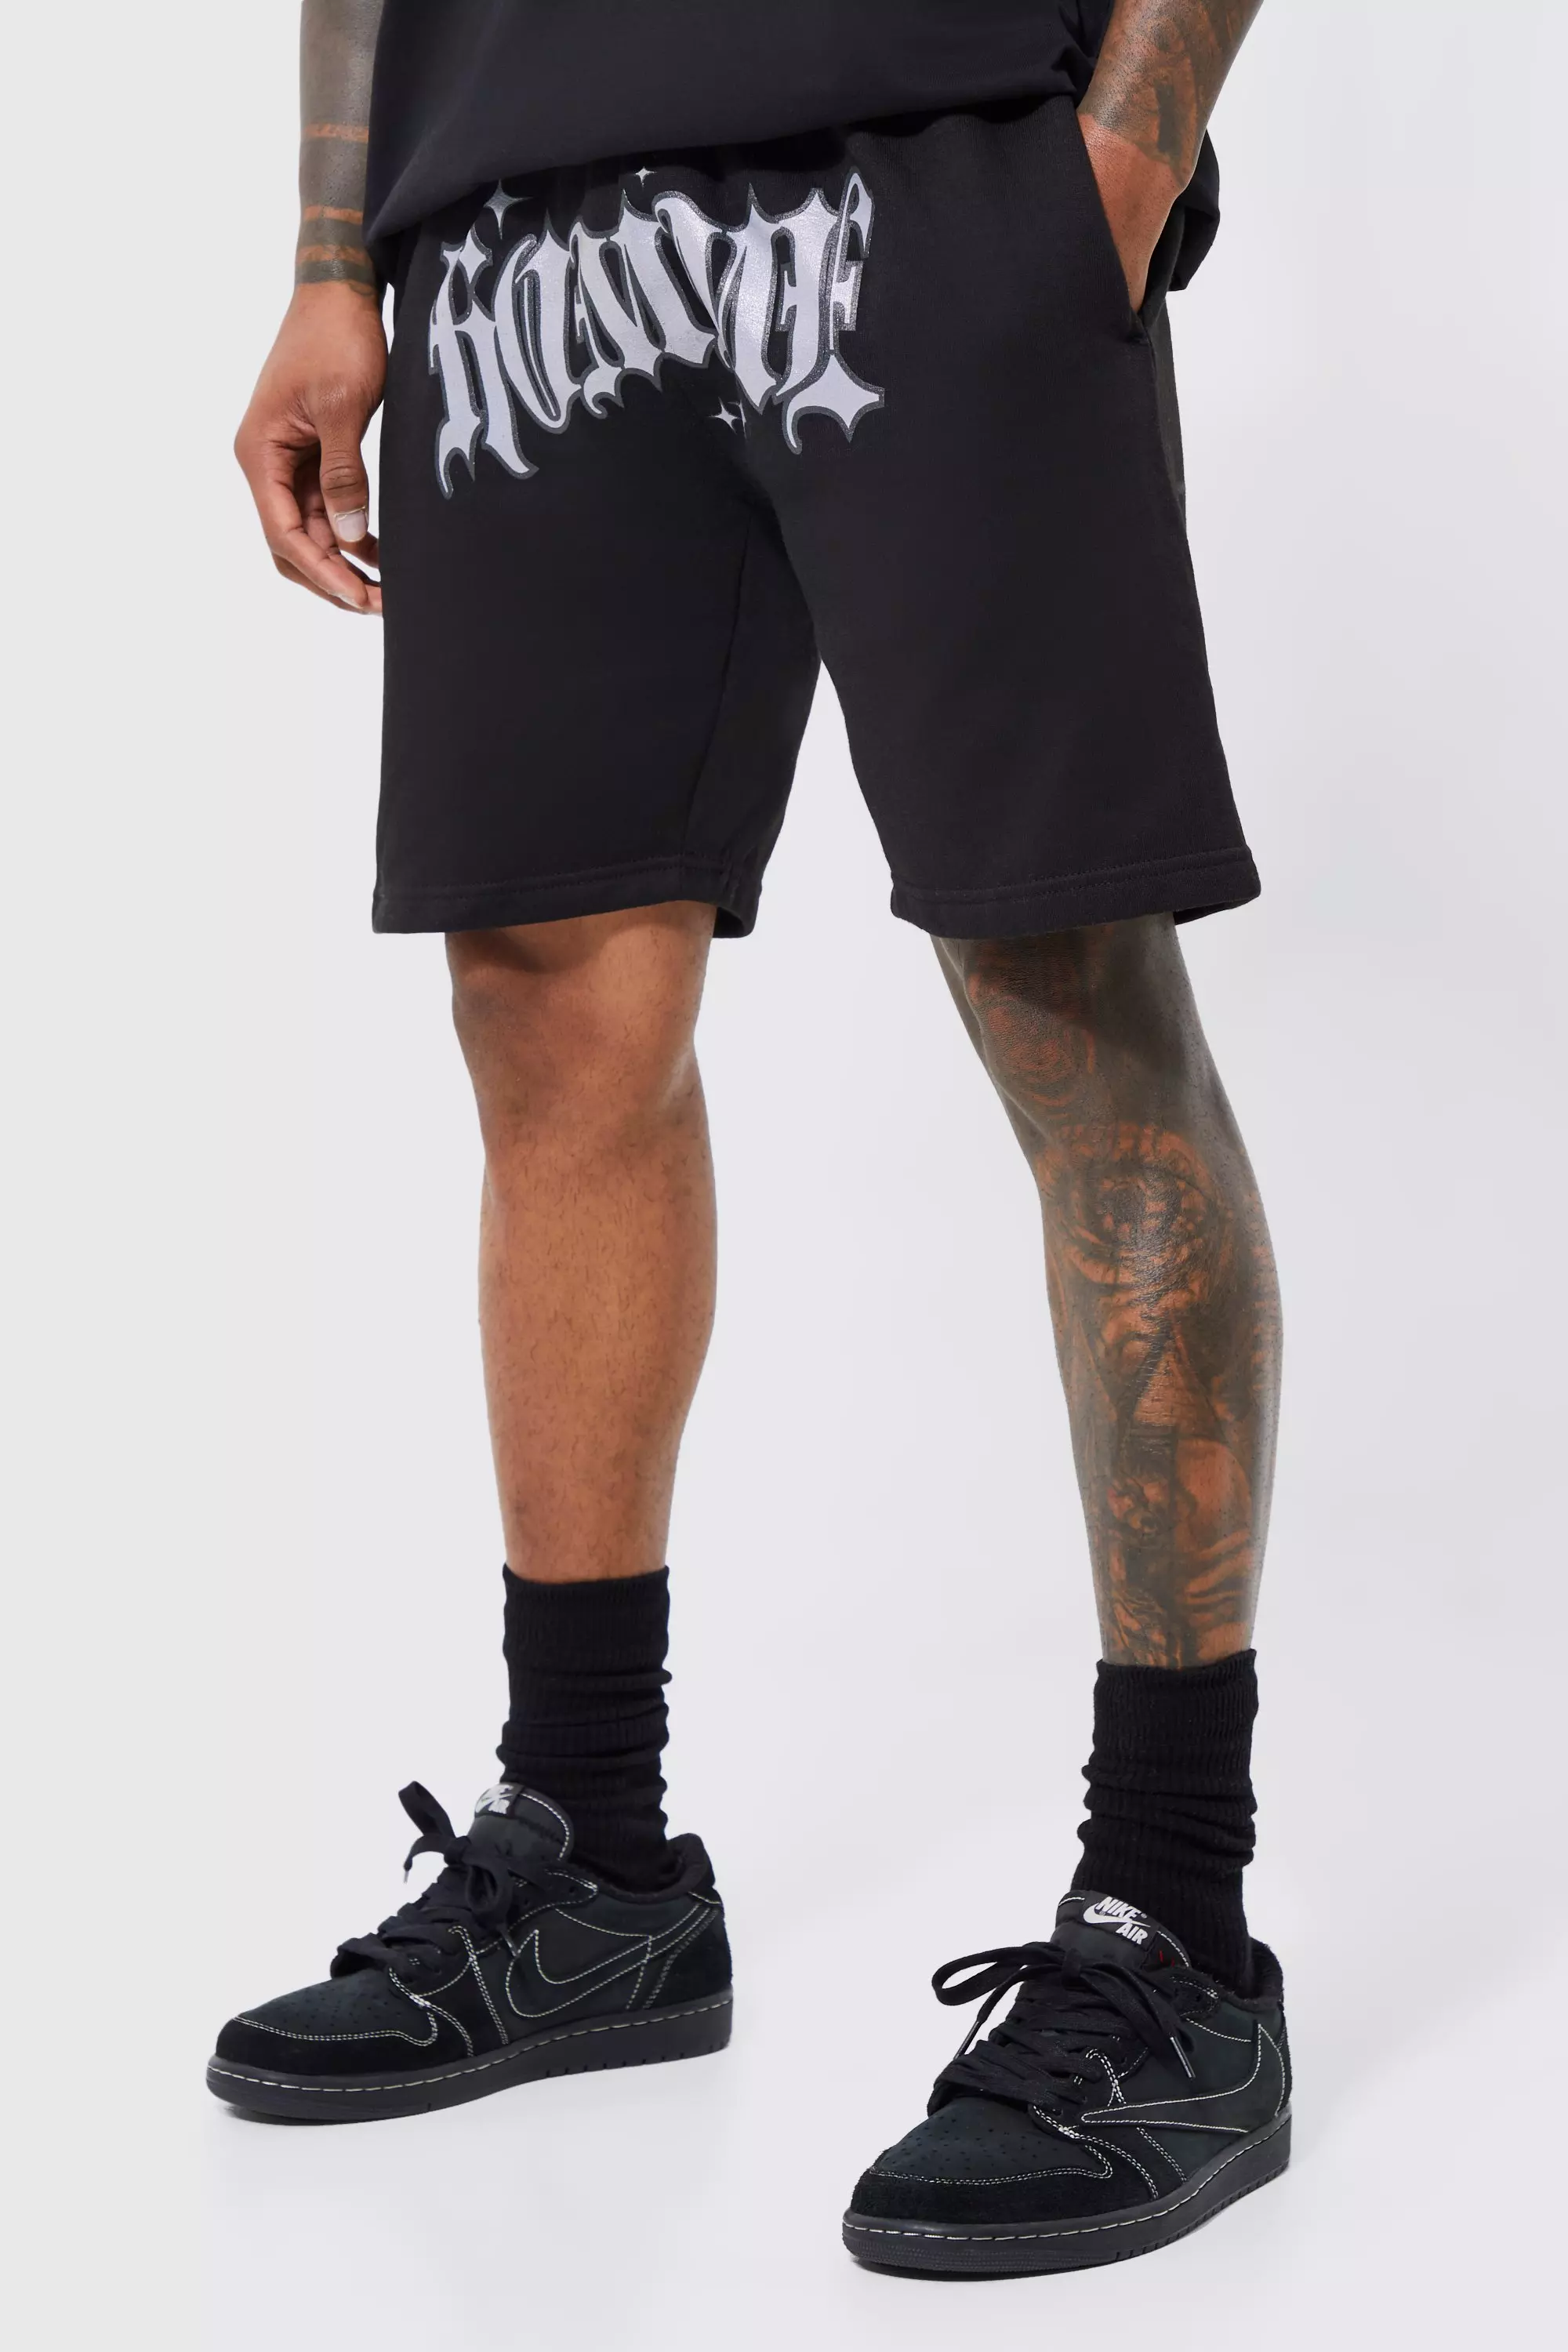 Loose Fit Homme Crotch Sweat Shorts Black